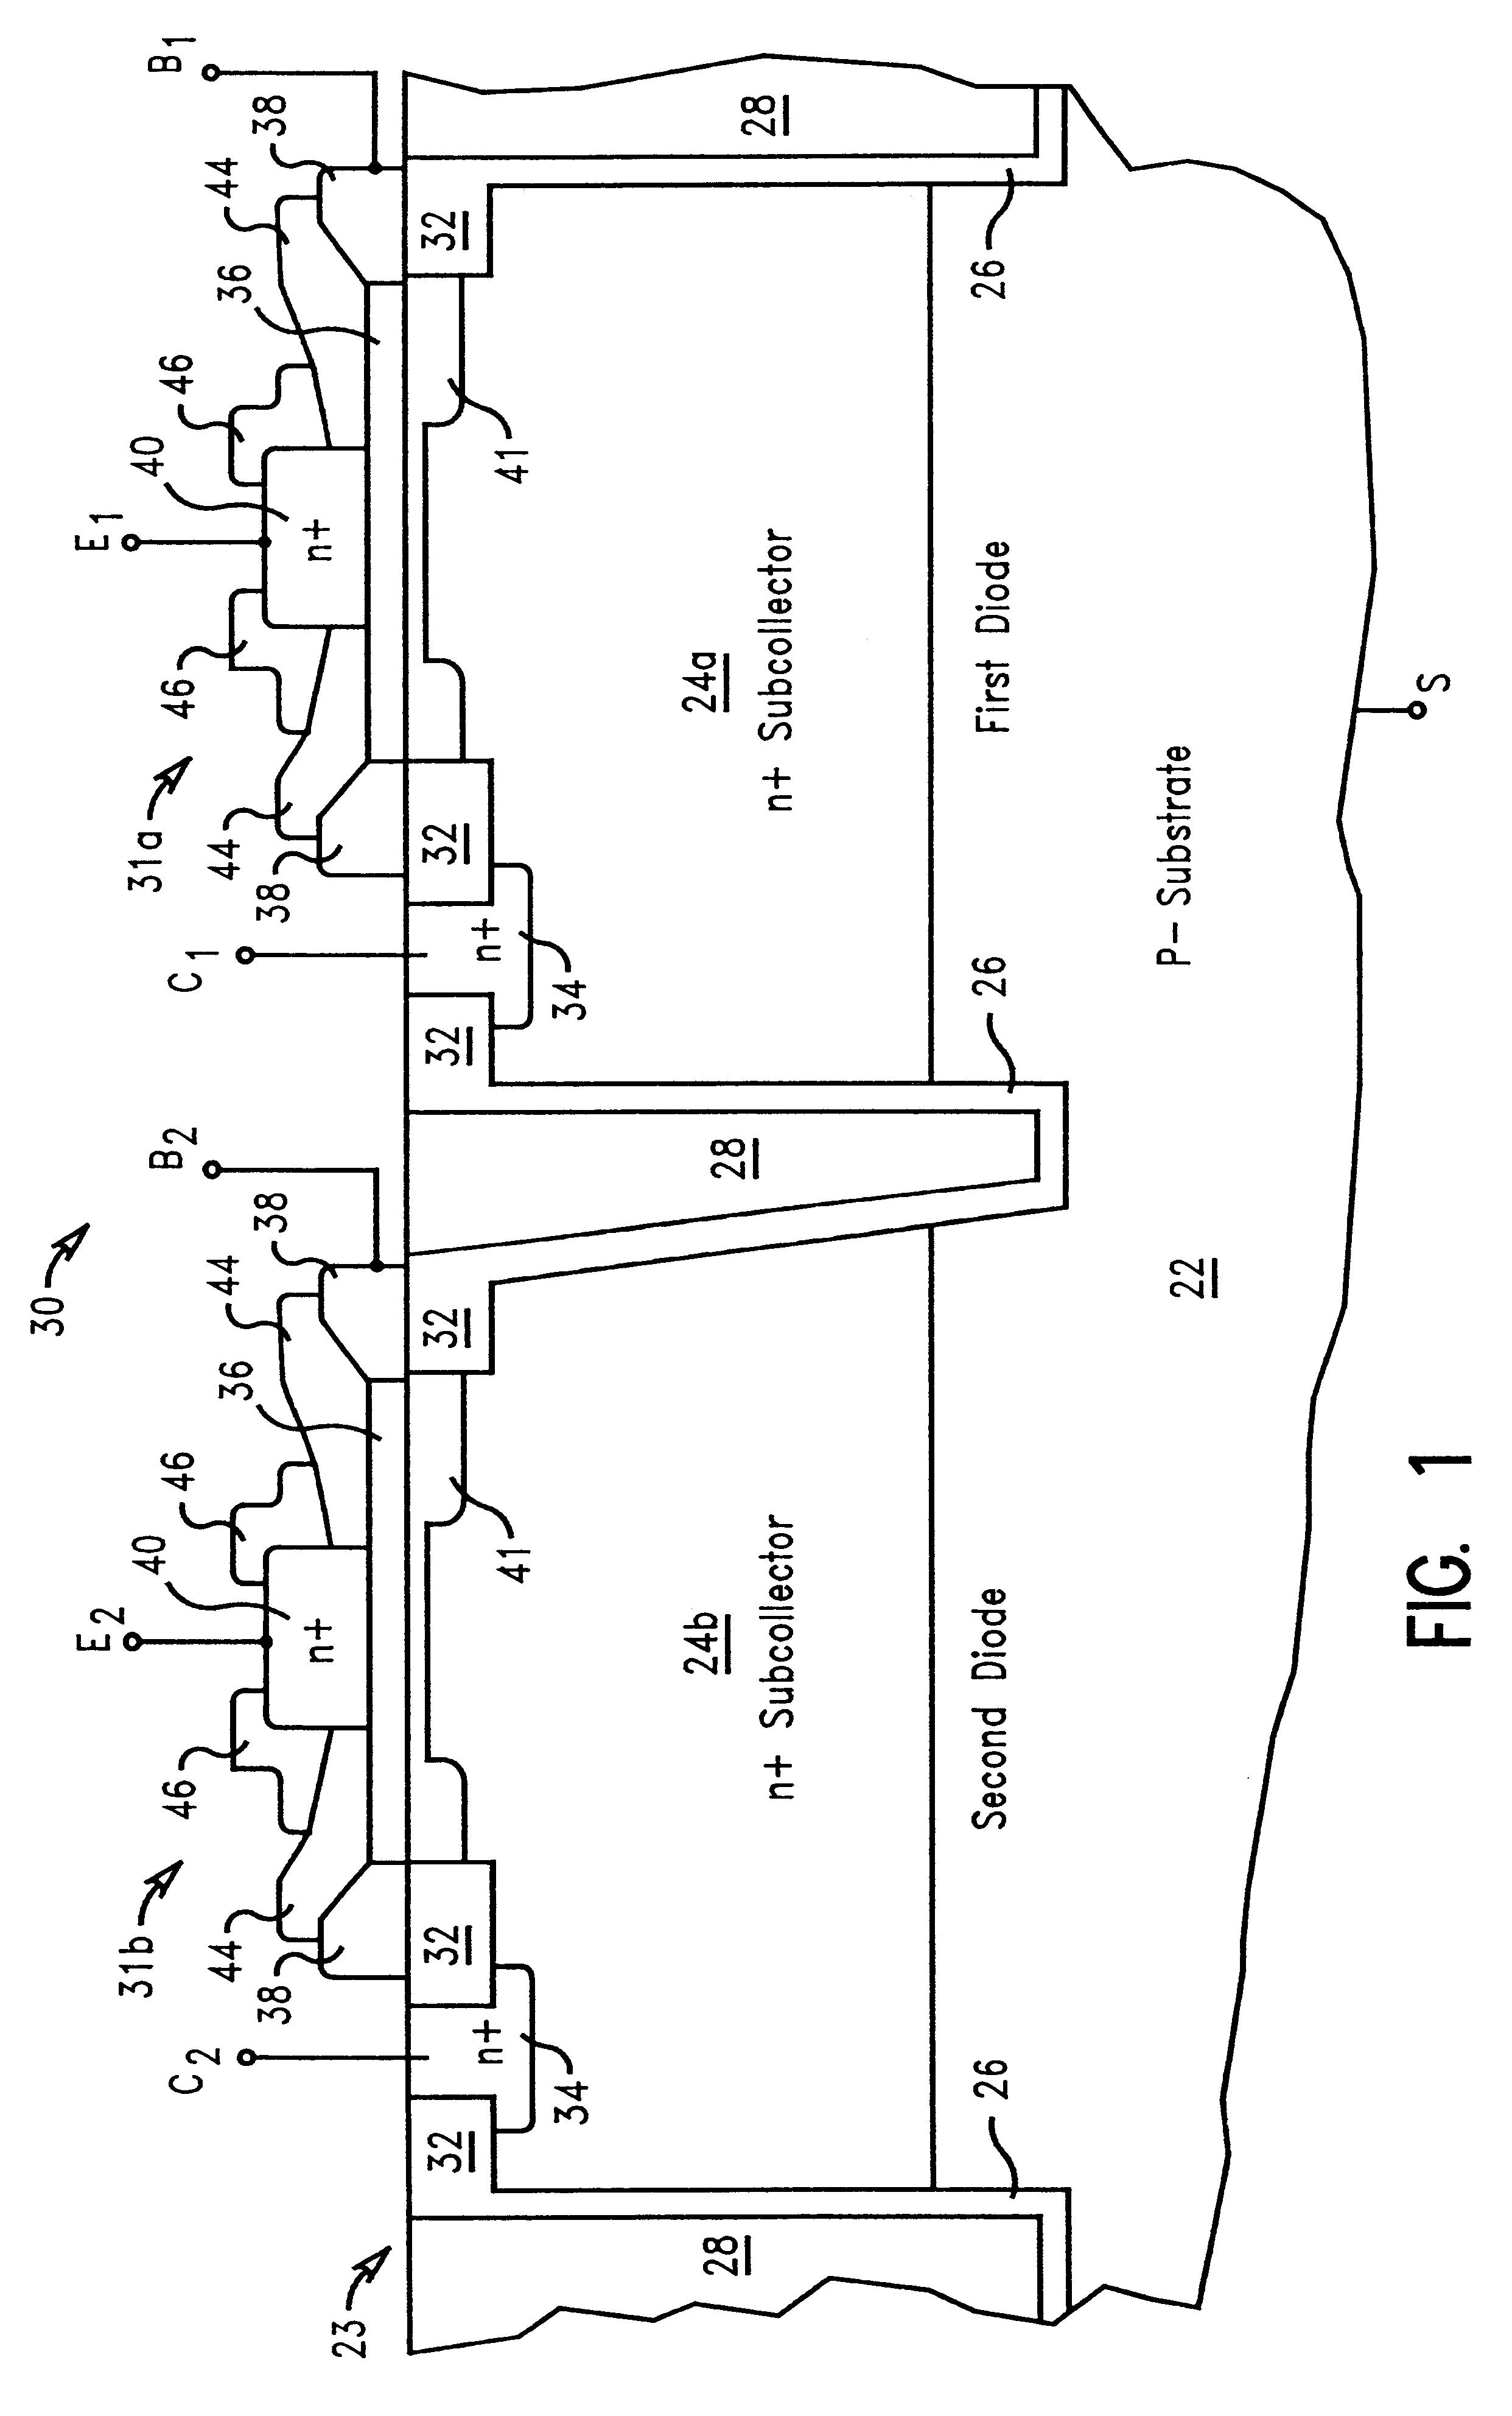 Trench-defined silicon germanium ESD diode network